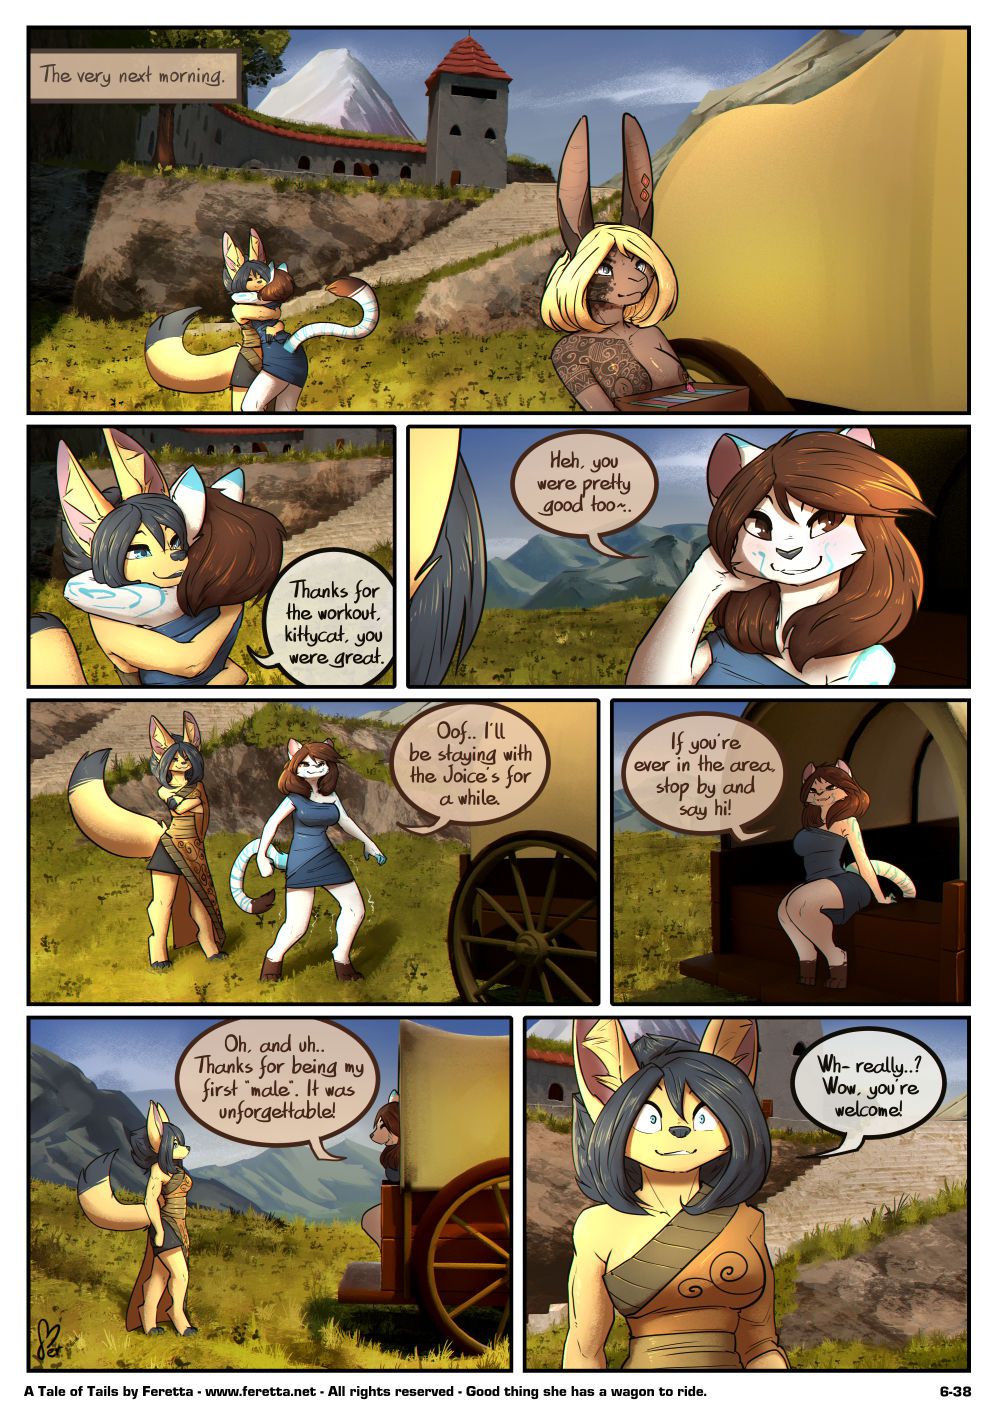 [Feretta] A Tale of Tails: Chapter 6 - Paths converge (ongoing) 39